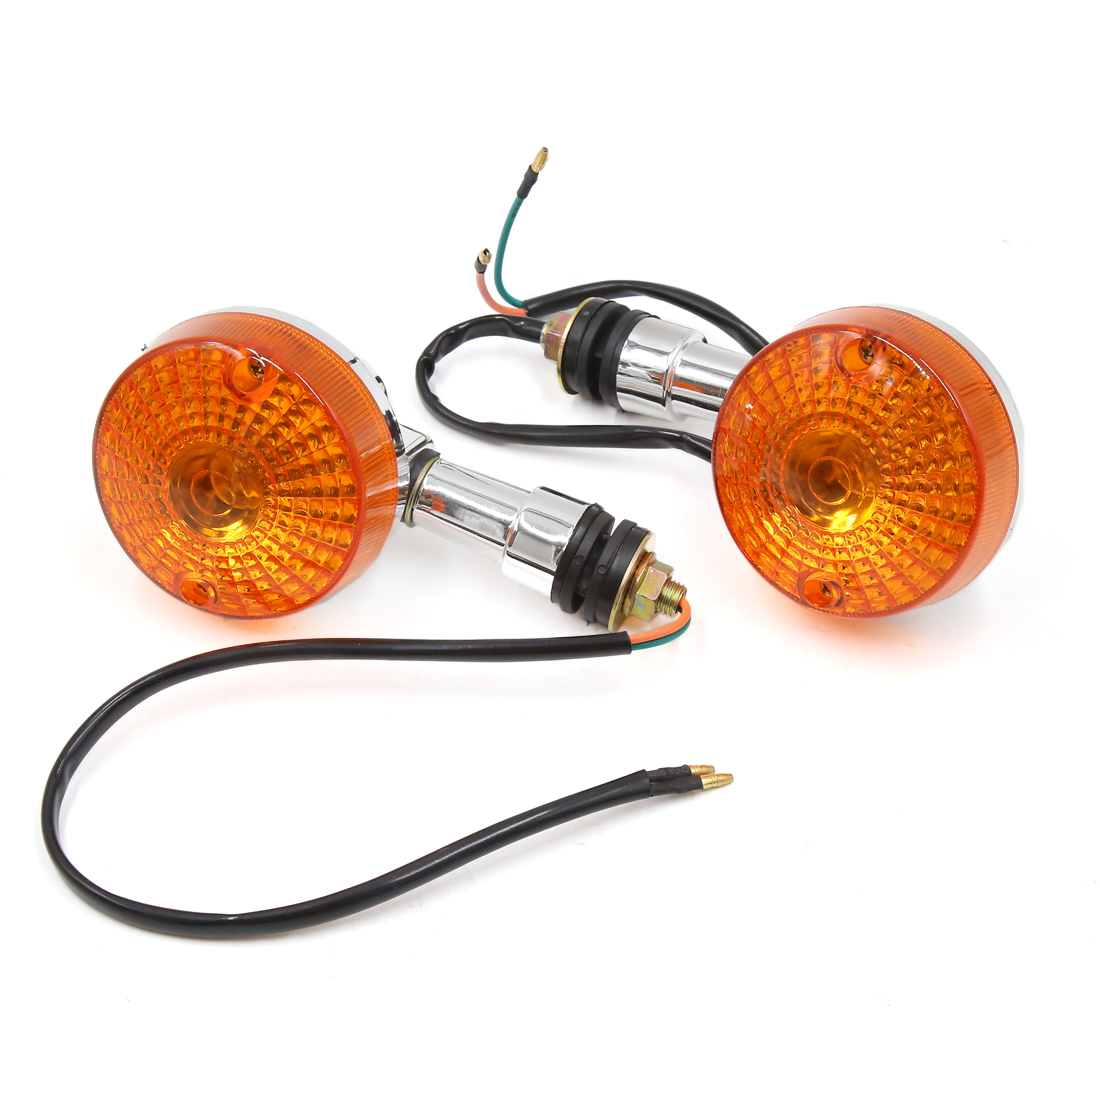 Unique Bargains 2Pcs Yellow LED Turn Signal Light Motorcycle Indicator Light Lamp Bulb for GN125